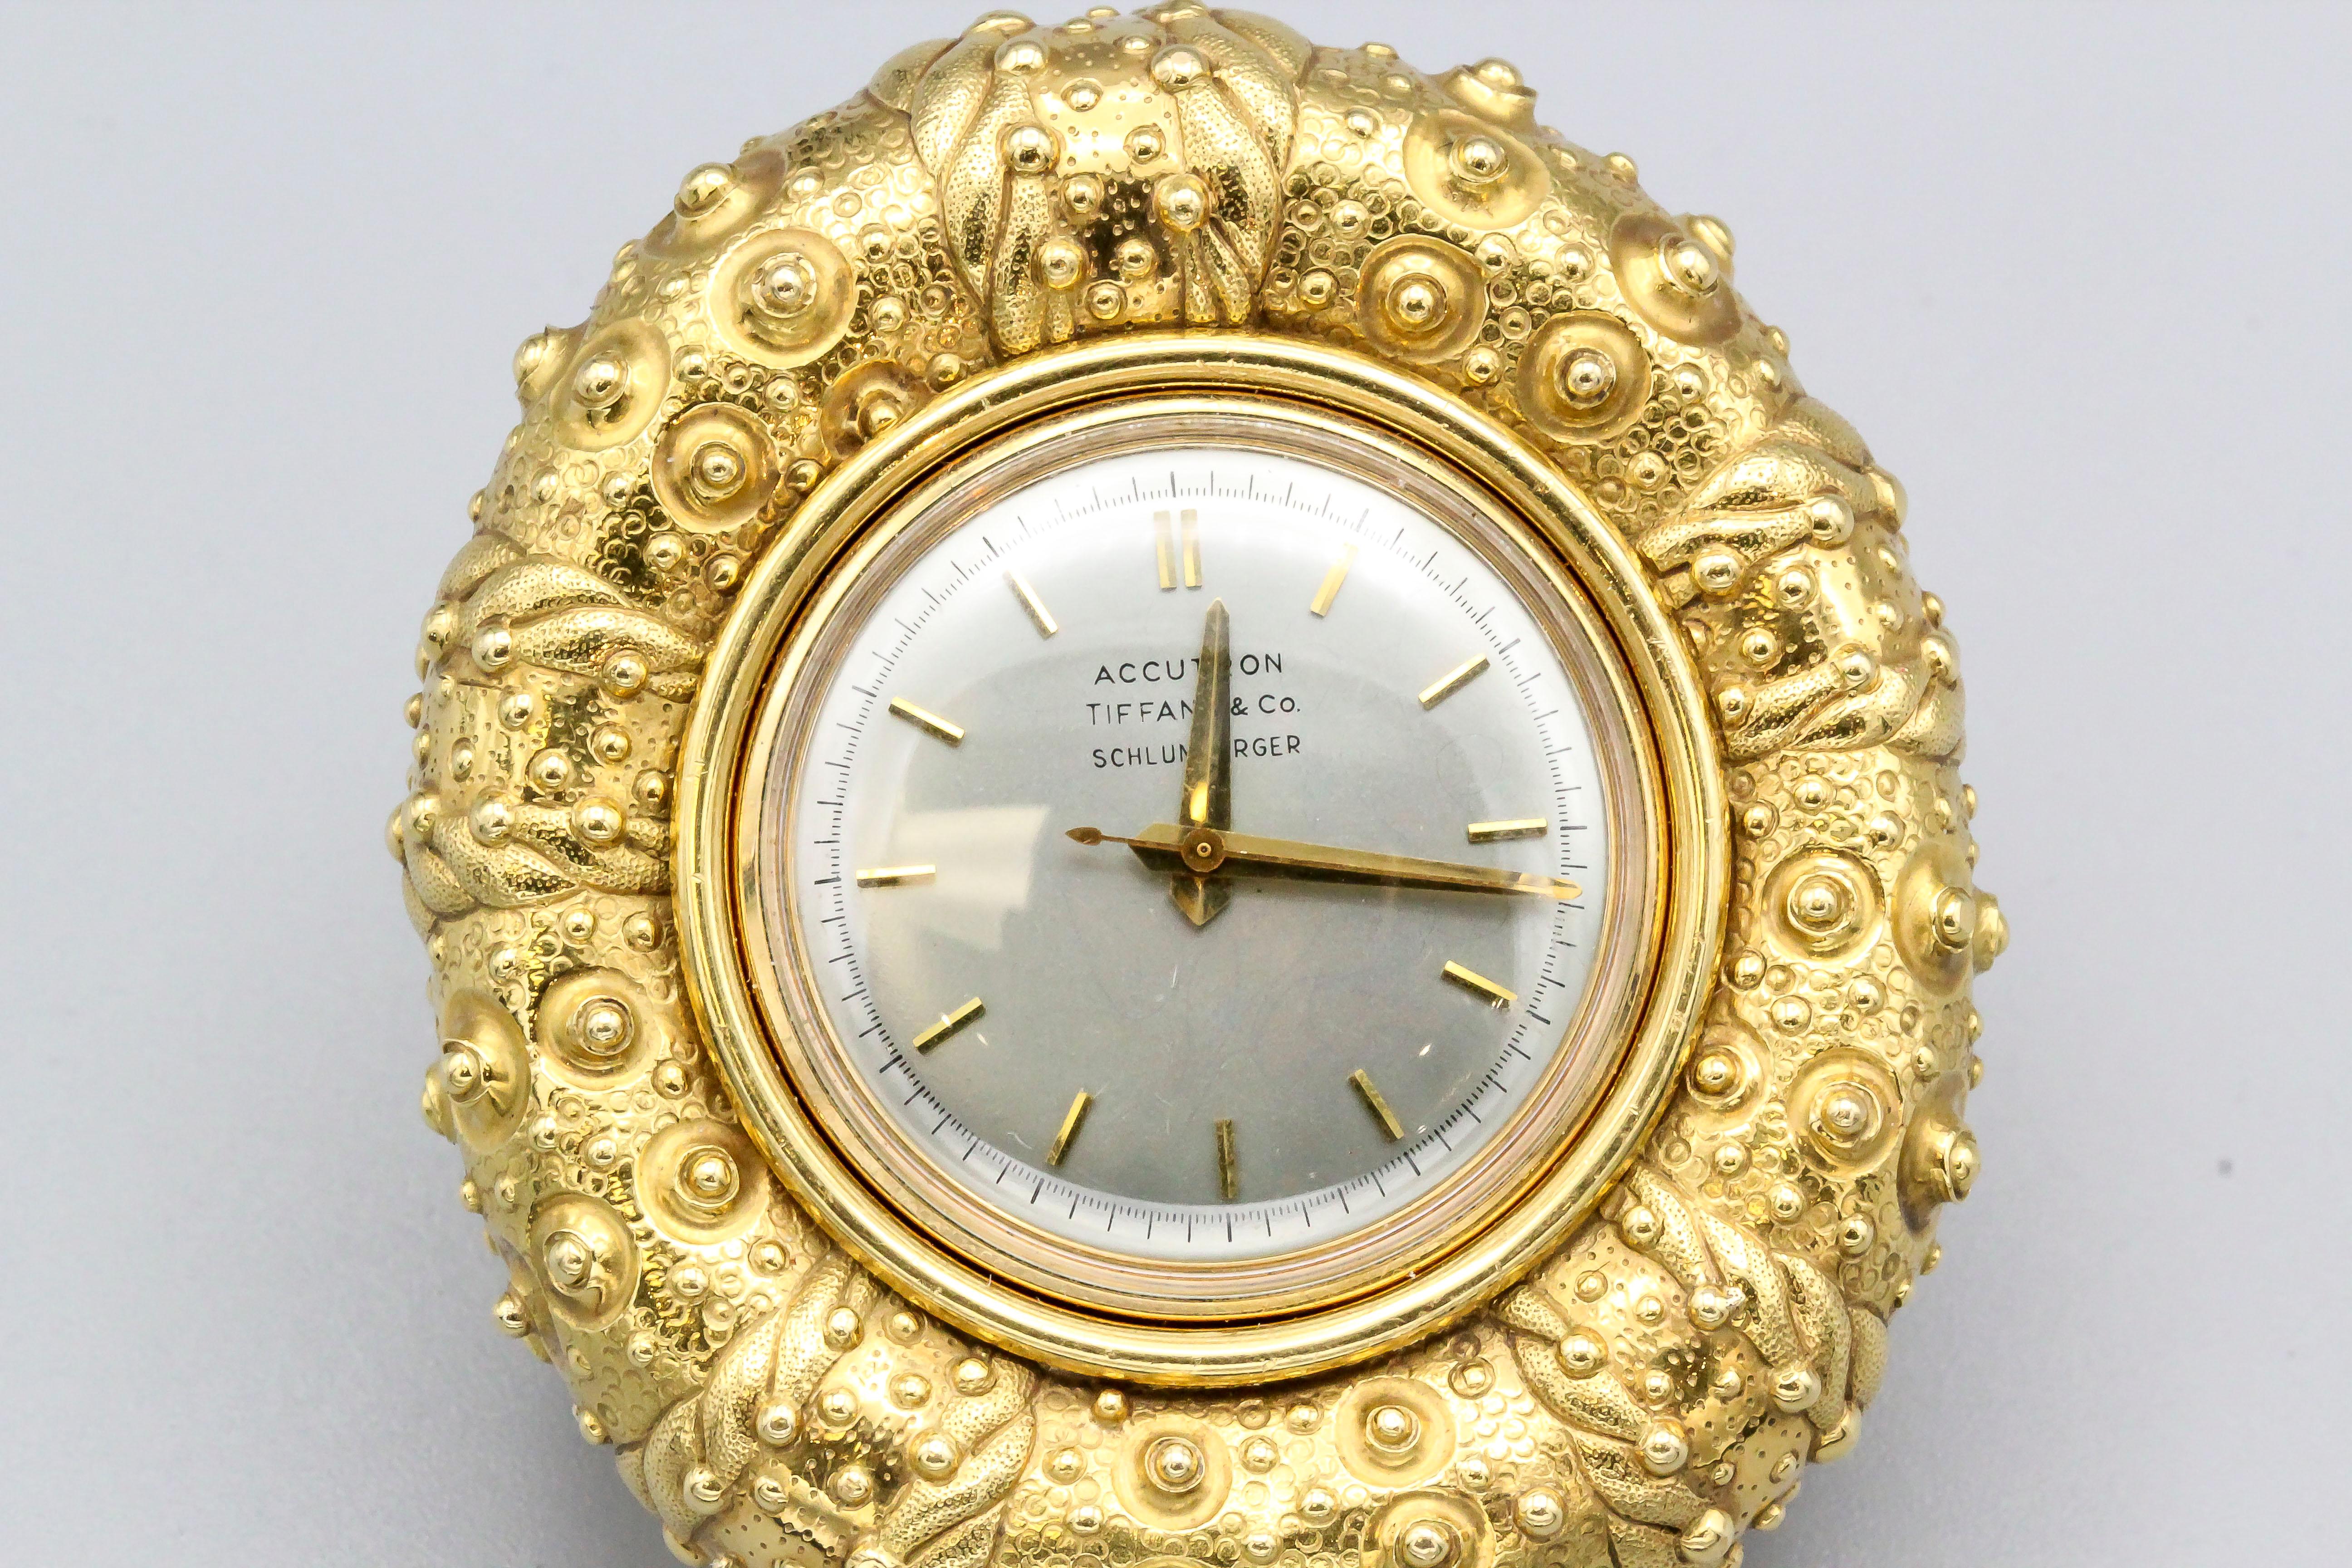 Elegant 18K yellow gold clock by Tiffany & Co. Schlumberger. It resembles a sea urchin. Bulova Accutron movement in excellent working condition.

Hallmarks: Tiffany & Co., Schlumberger, Bulova Accutron. Back of clock: Bulova, 18KT Gold, patented,